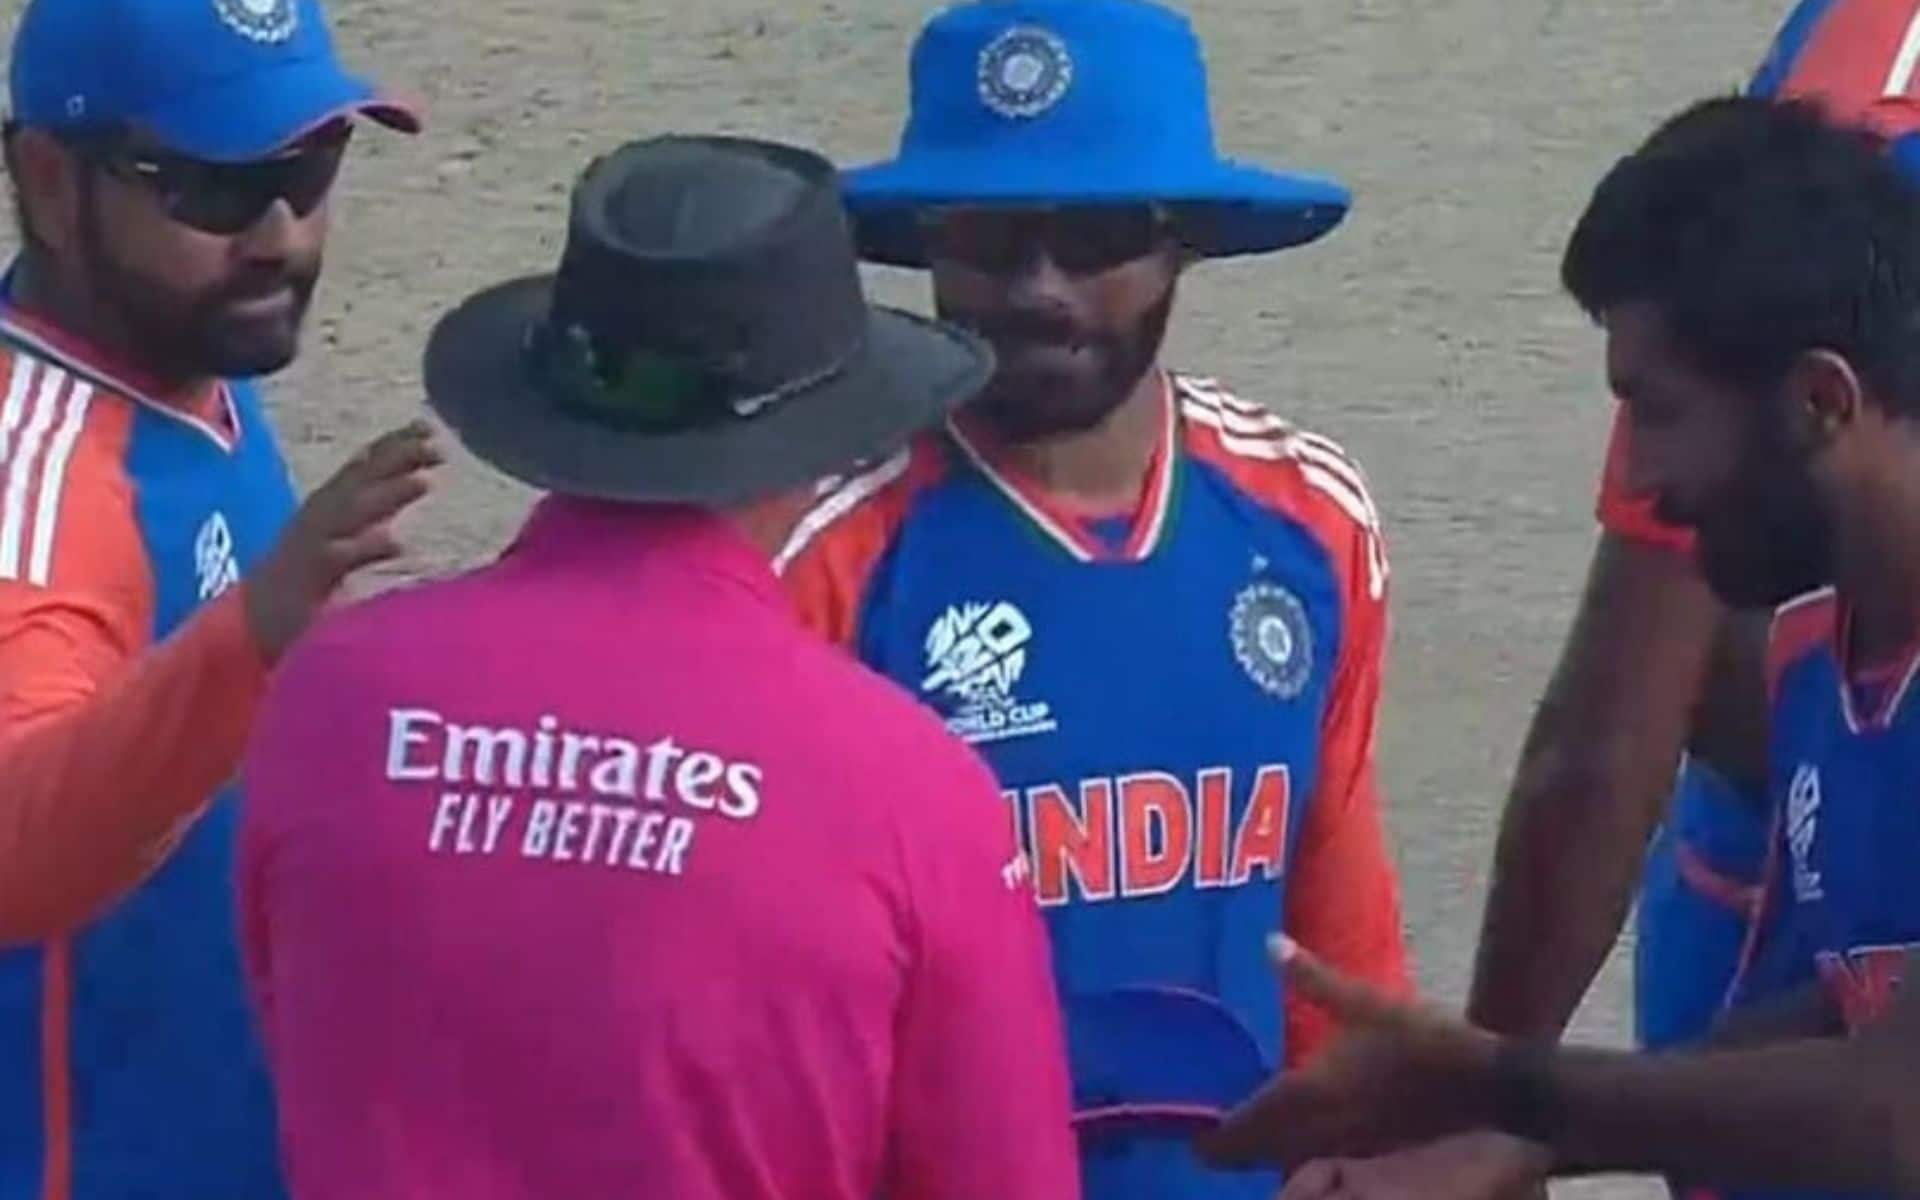 Umpire ignores Bumrah from shaking hands (X.com)